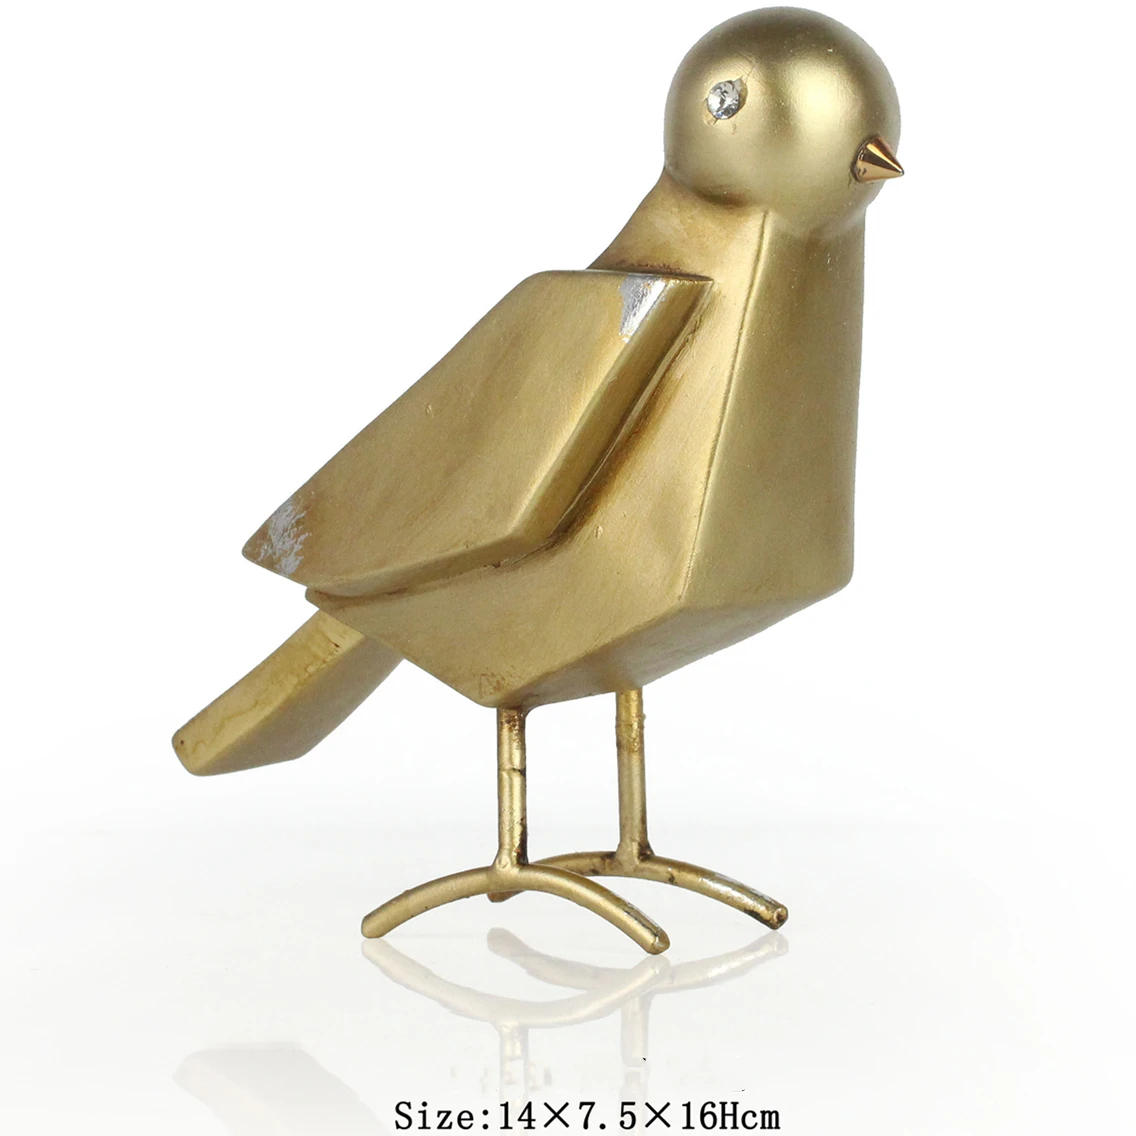 Hot Selling Modern Luxury Home Decor Golden Chick Home Decor Bedroom Table Ornament Other Home Decor Accessories